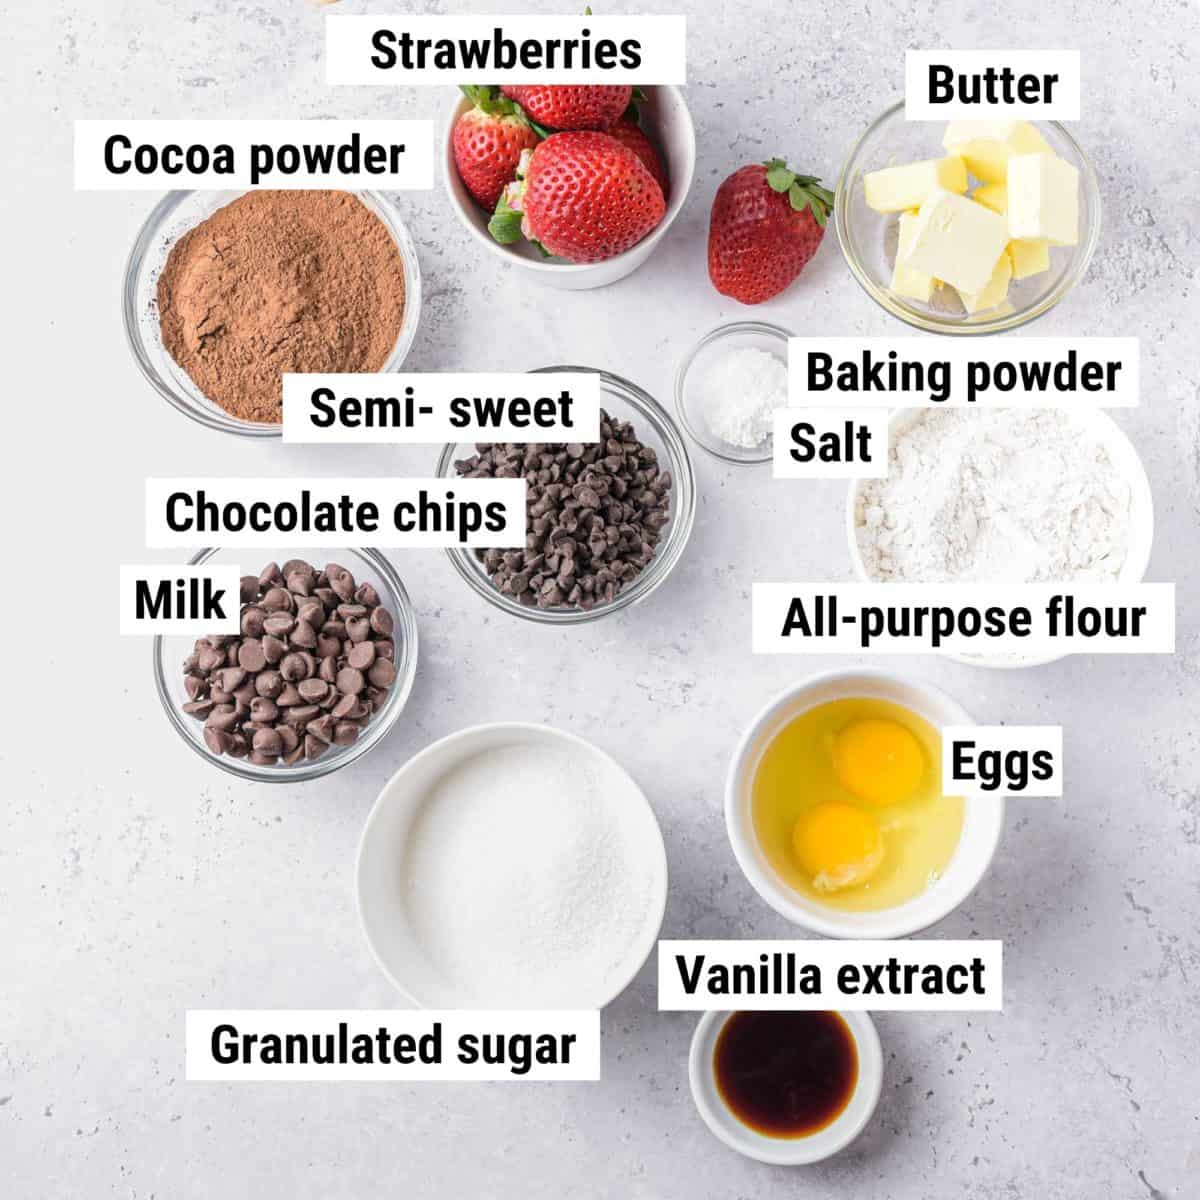 The ingredients used to make brownies with strawberries laid out on a table.